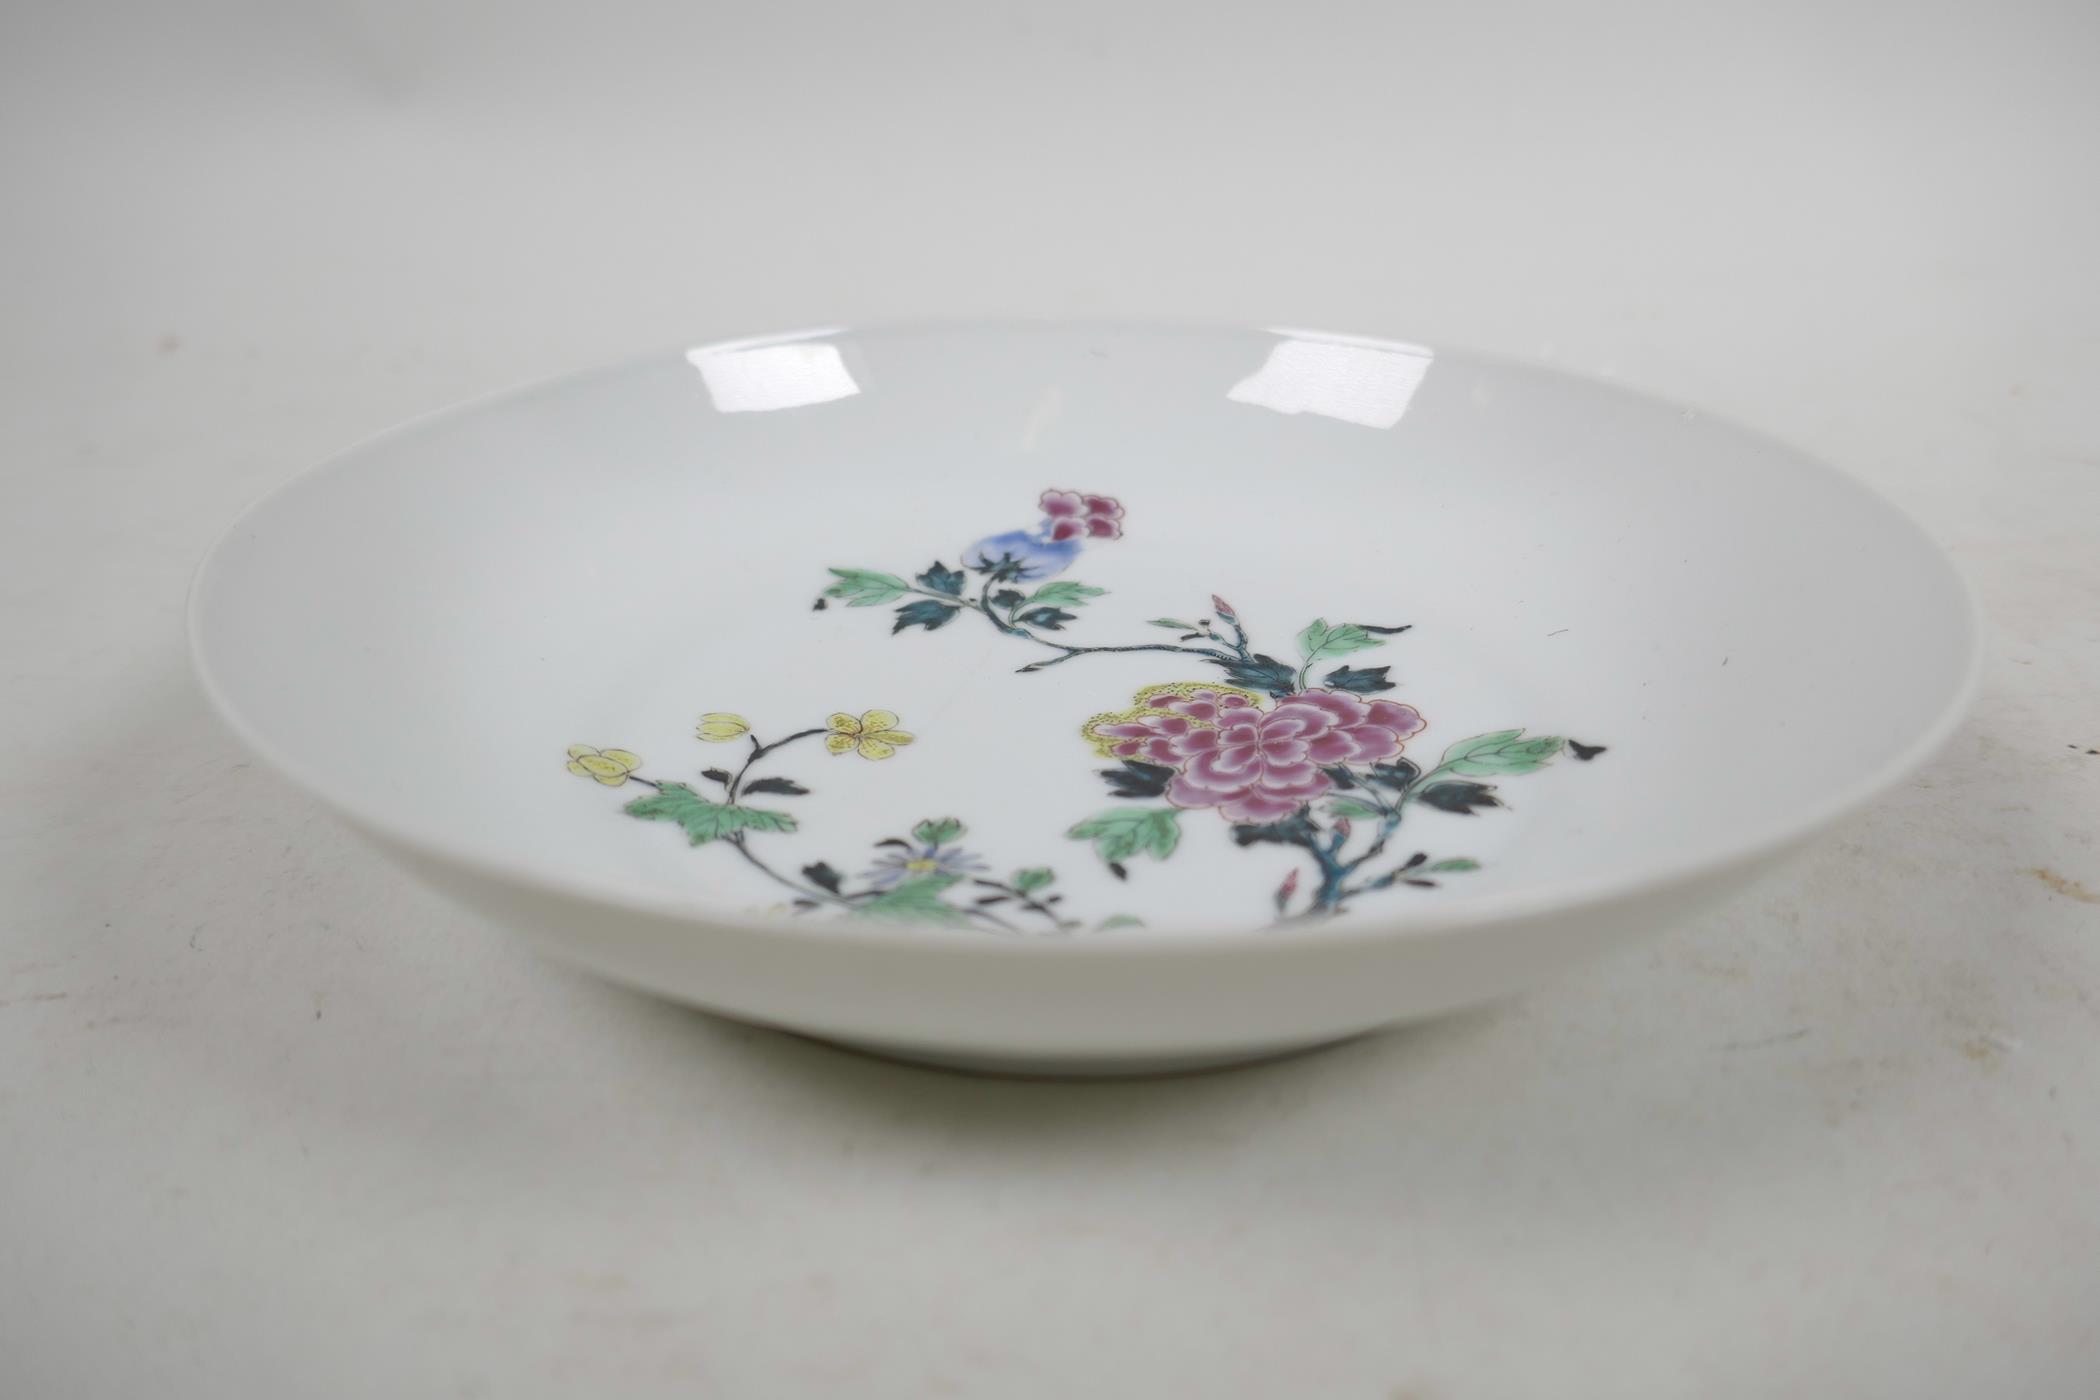 A fine quality Chinese Yongzheng famille rose 'Peony' eggshell porcelain dish, with delicate decorat - Image 3 of 6